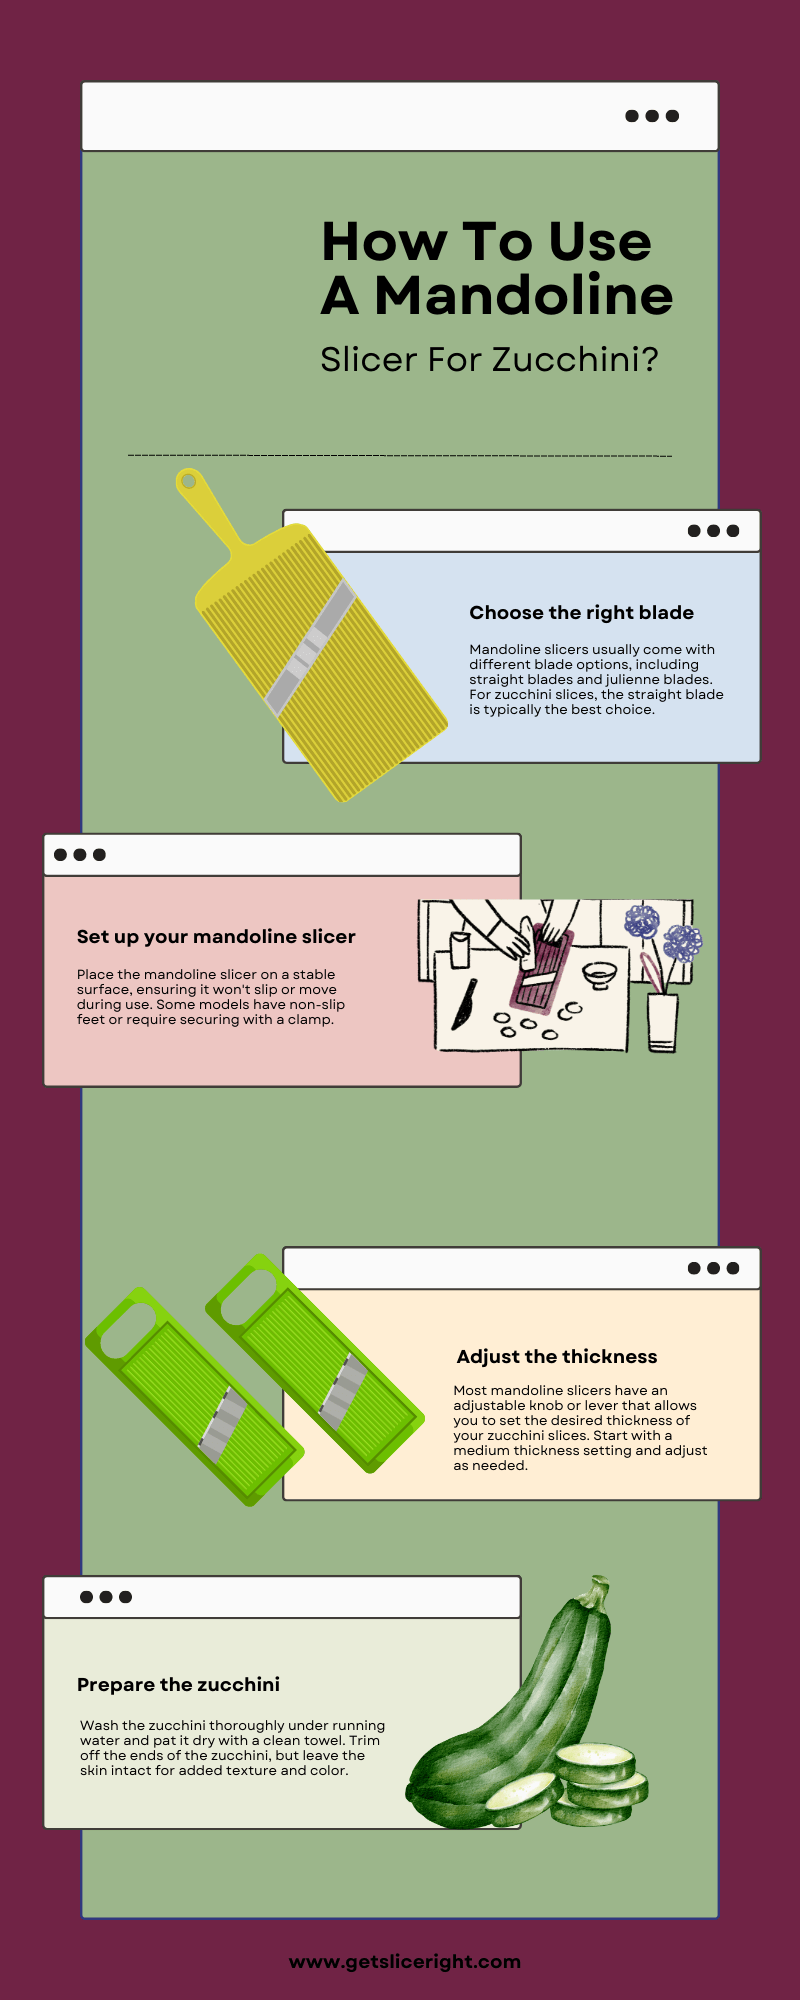 How to use a mandoline slicer for zucchini - infographics